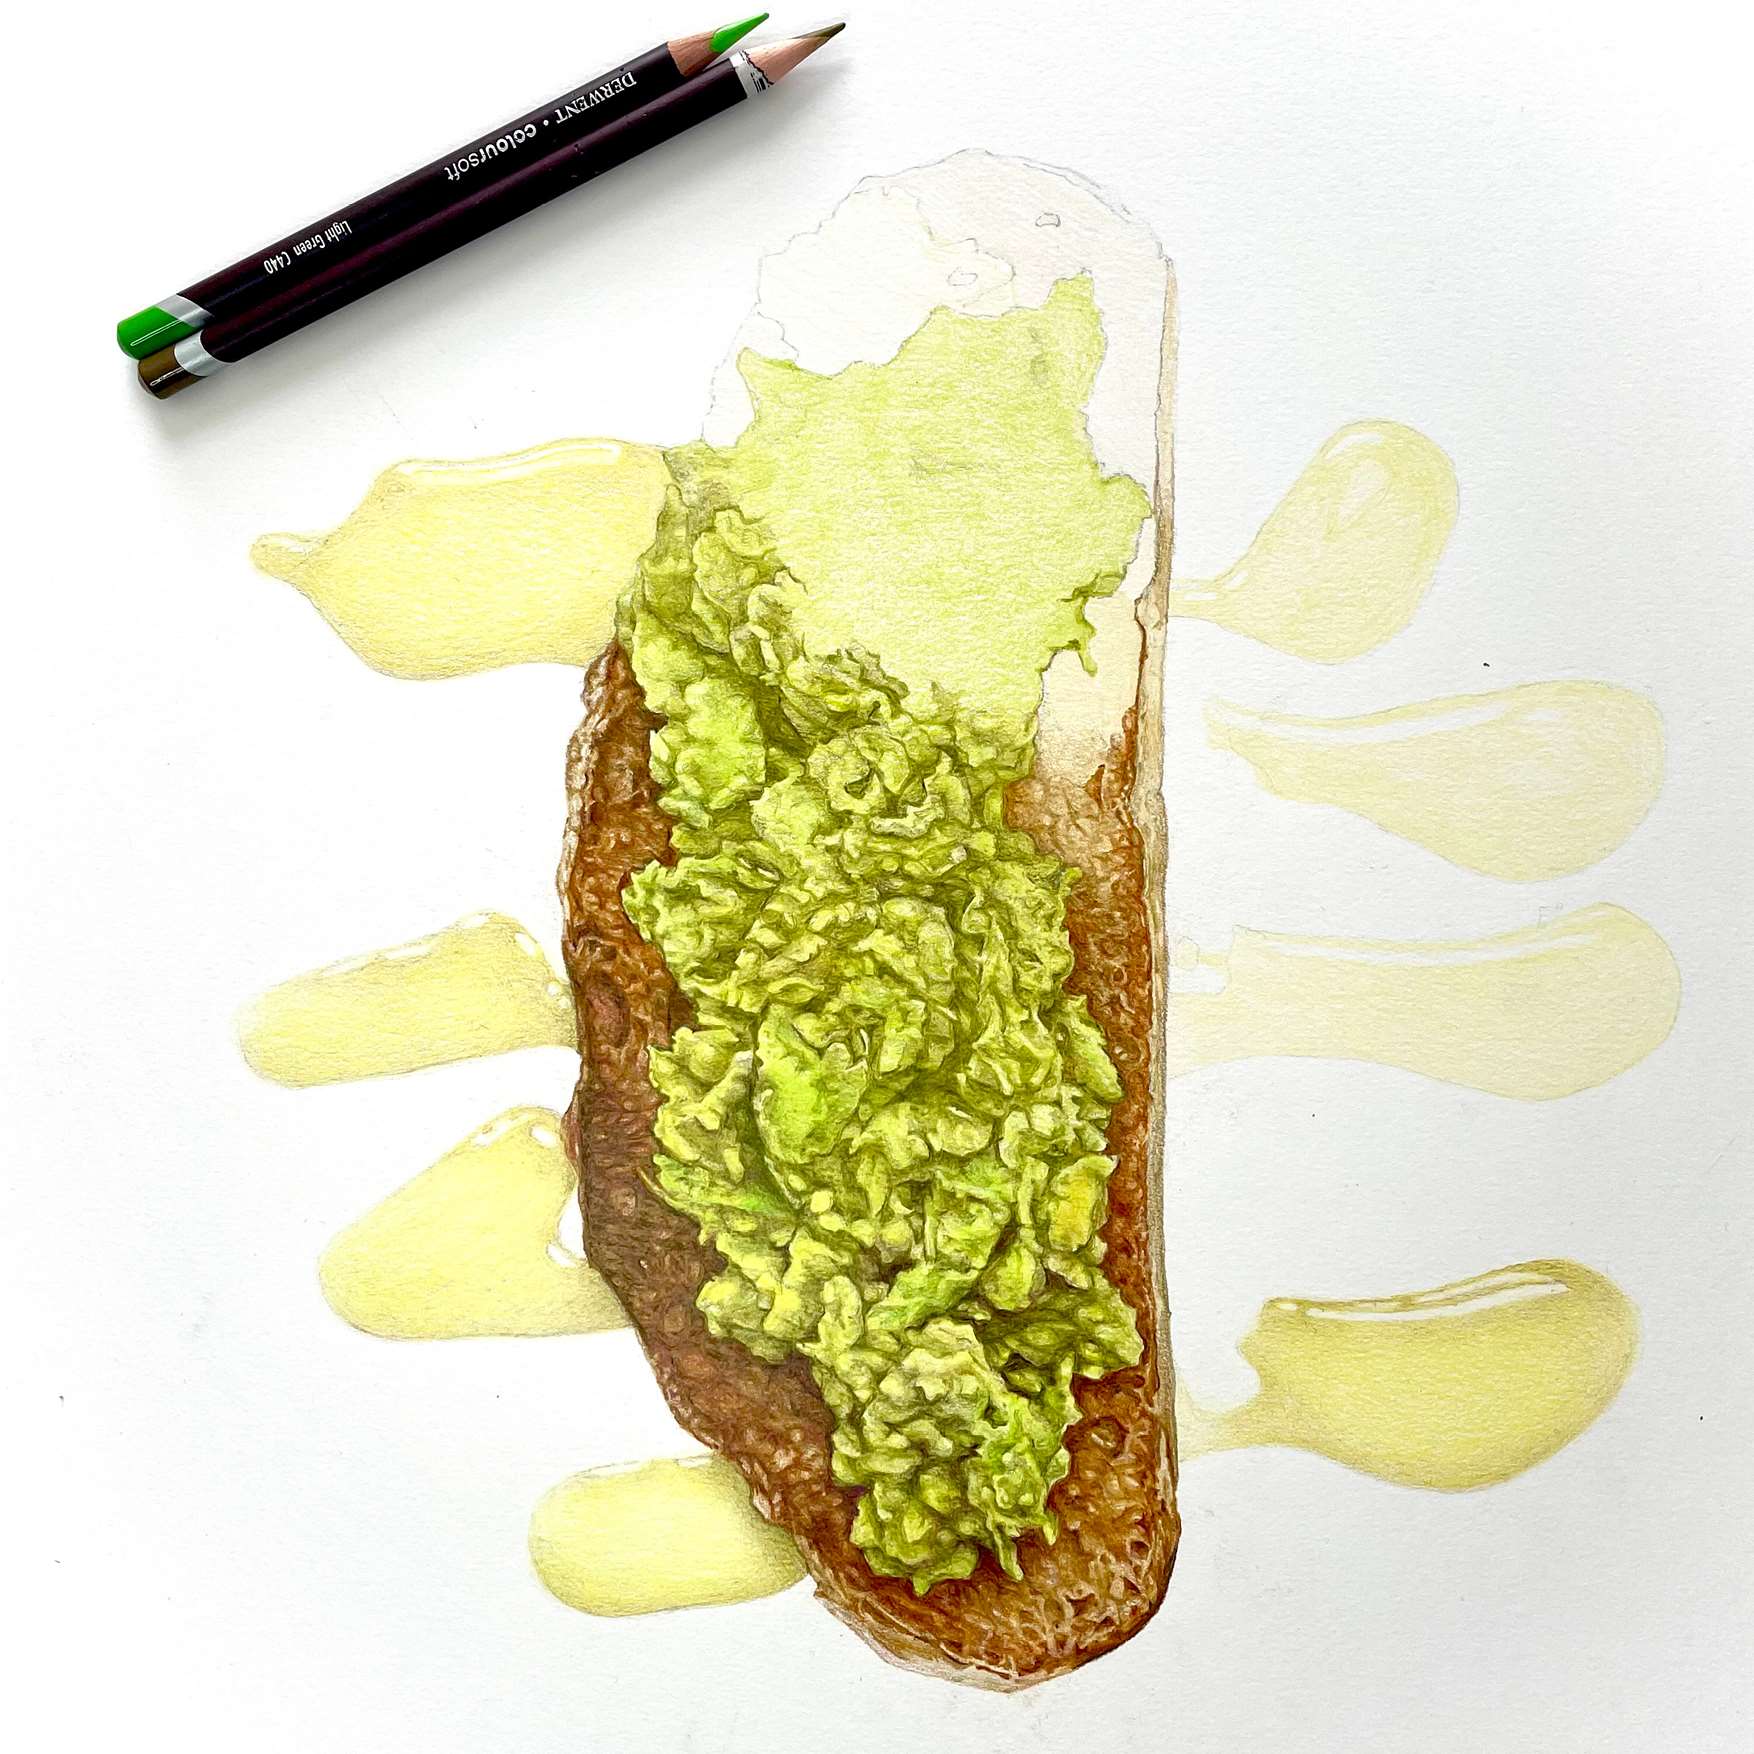 Pencil on Paper, Work in progress image of an illustration being crafted representing avocado on toast.